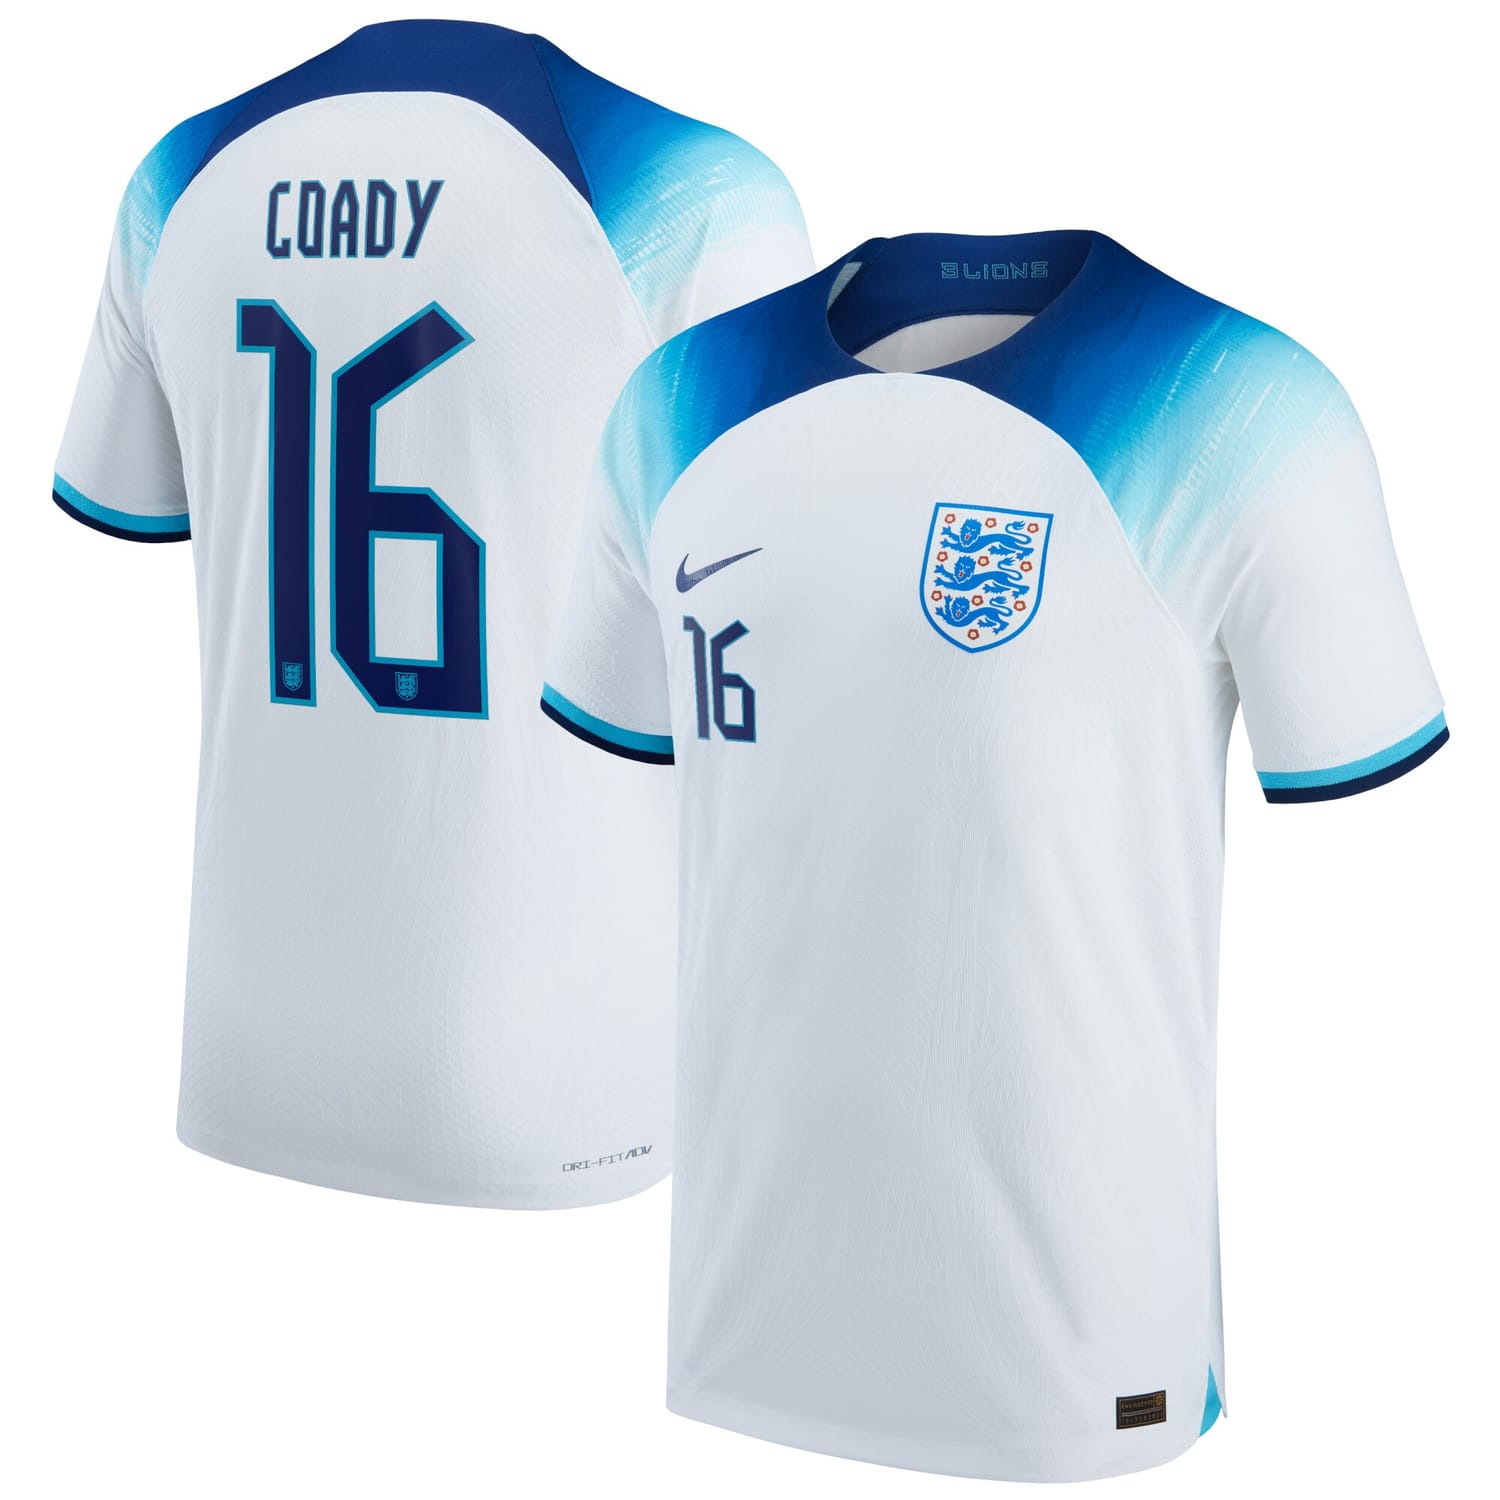 England National Team Home Authentic Jersey Shirt 2022 player Conor Coady 16 printing for Men